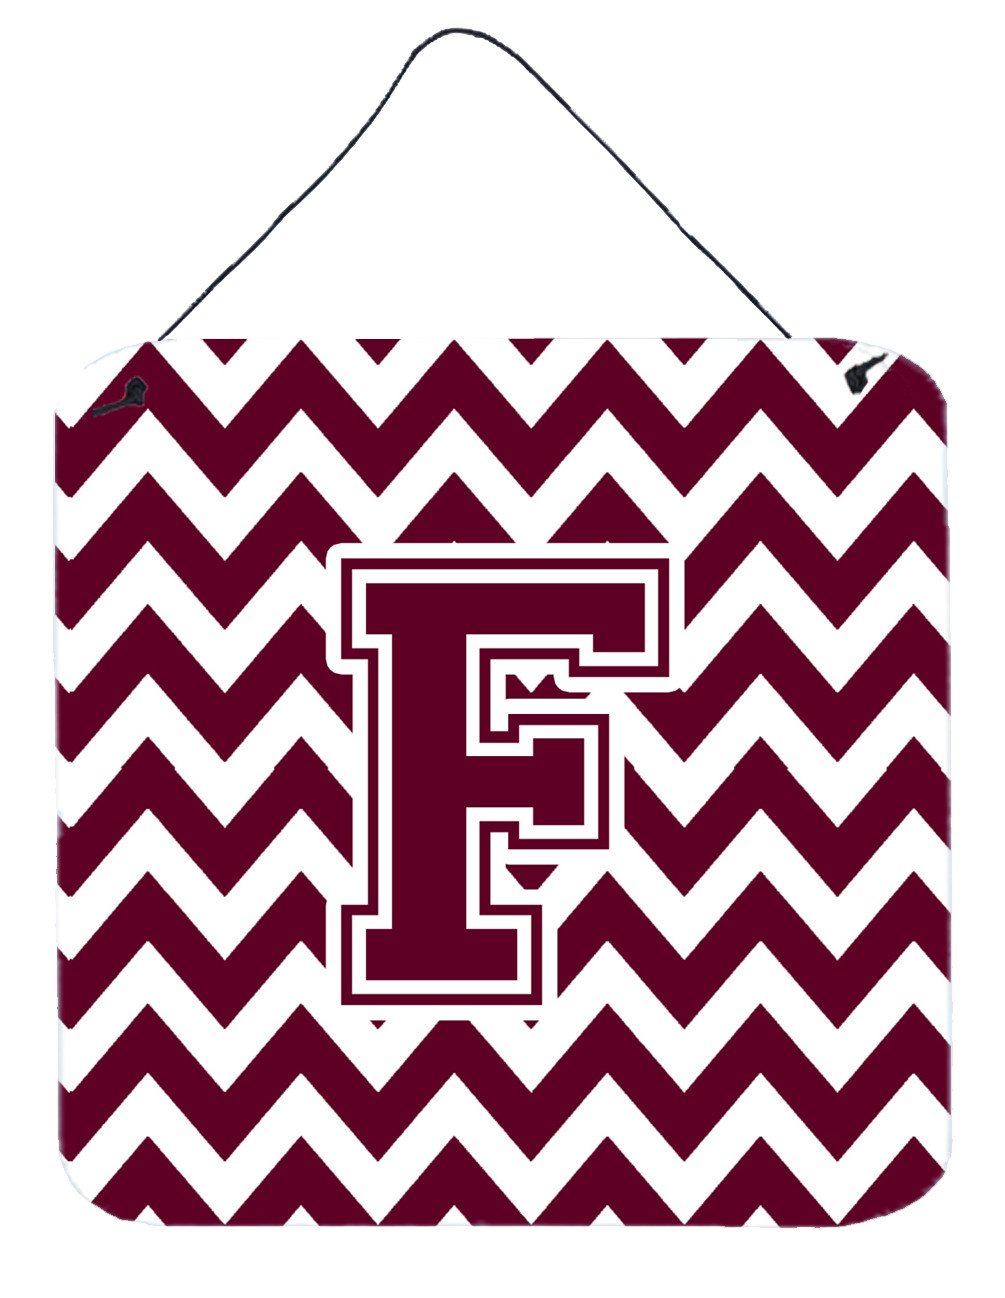 Letter F Chevron Maroon and White  Wall or Door Hanging Prints CJ1051-FDS66 by Caroline's Treasures